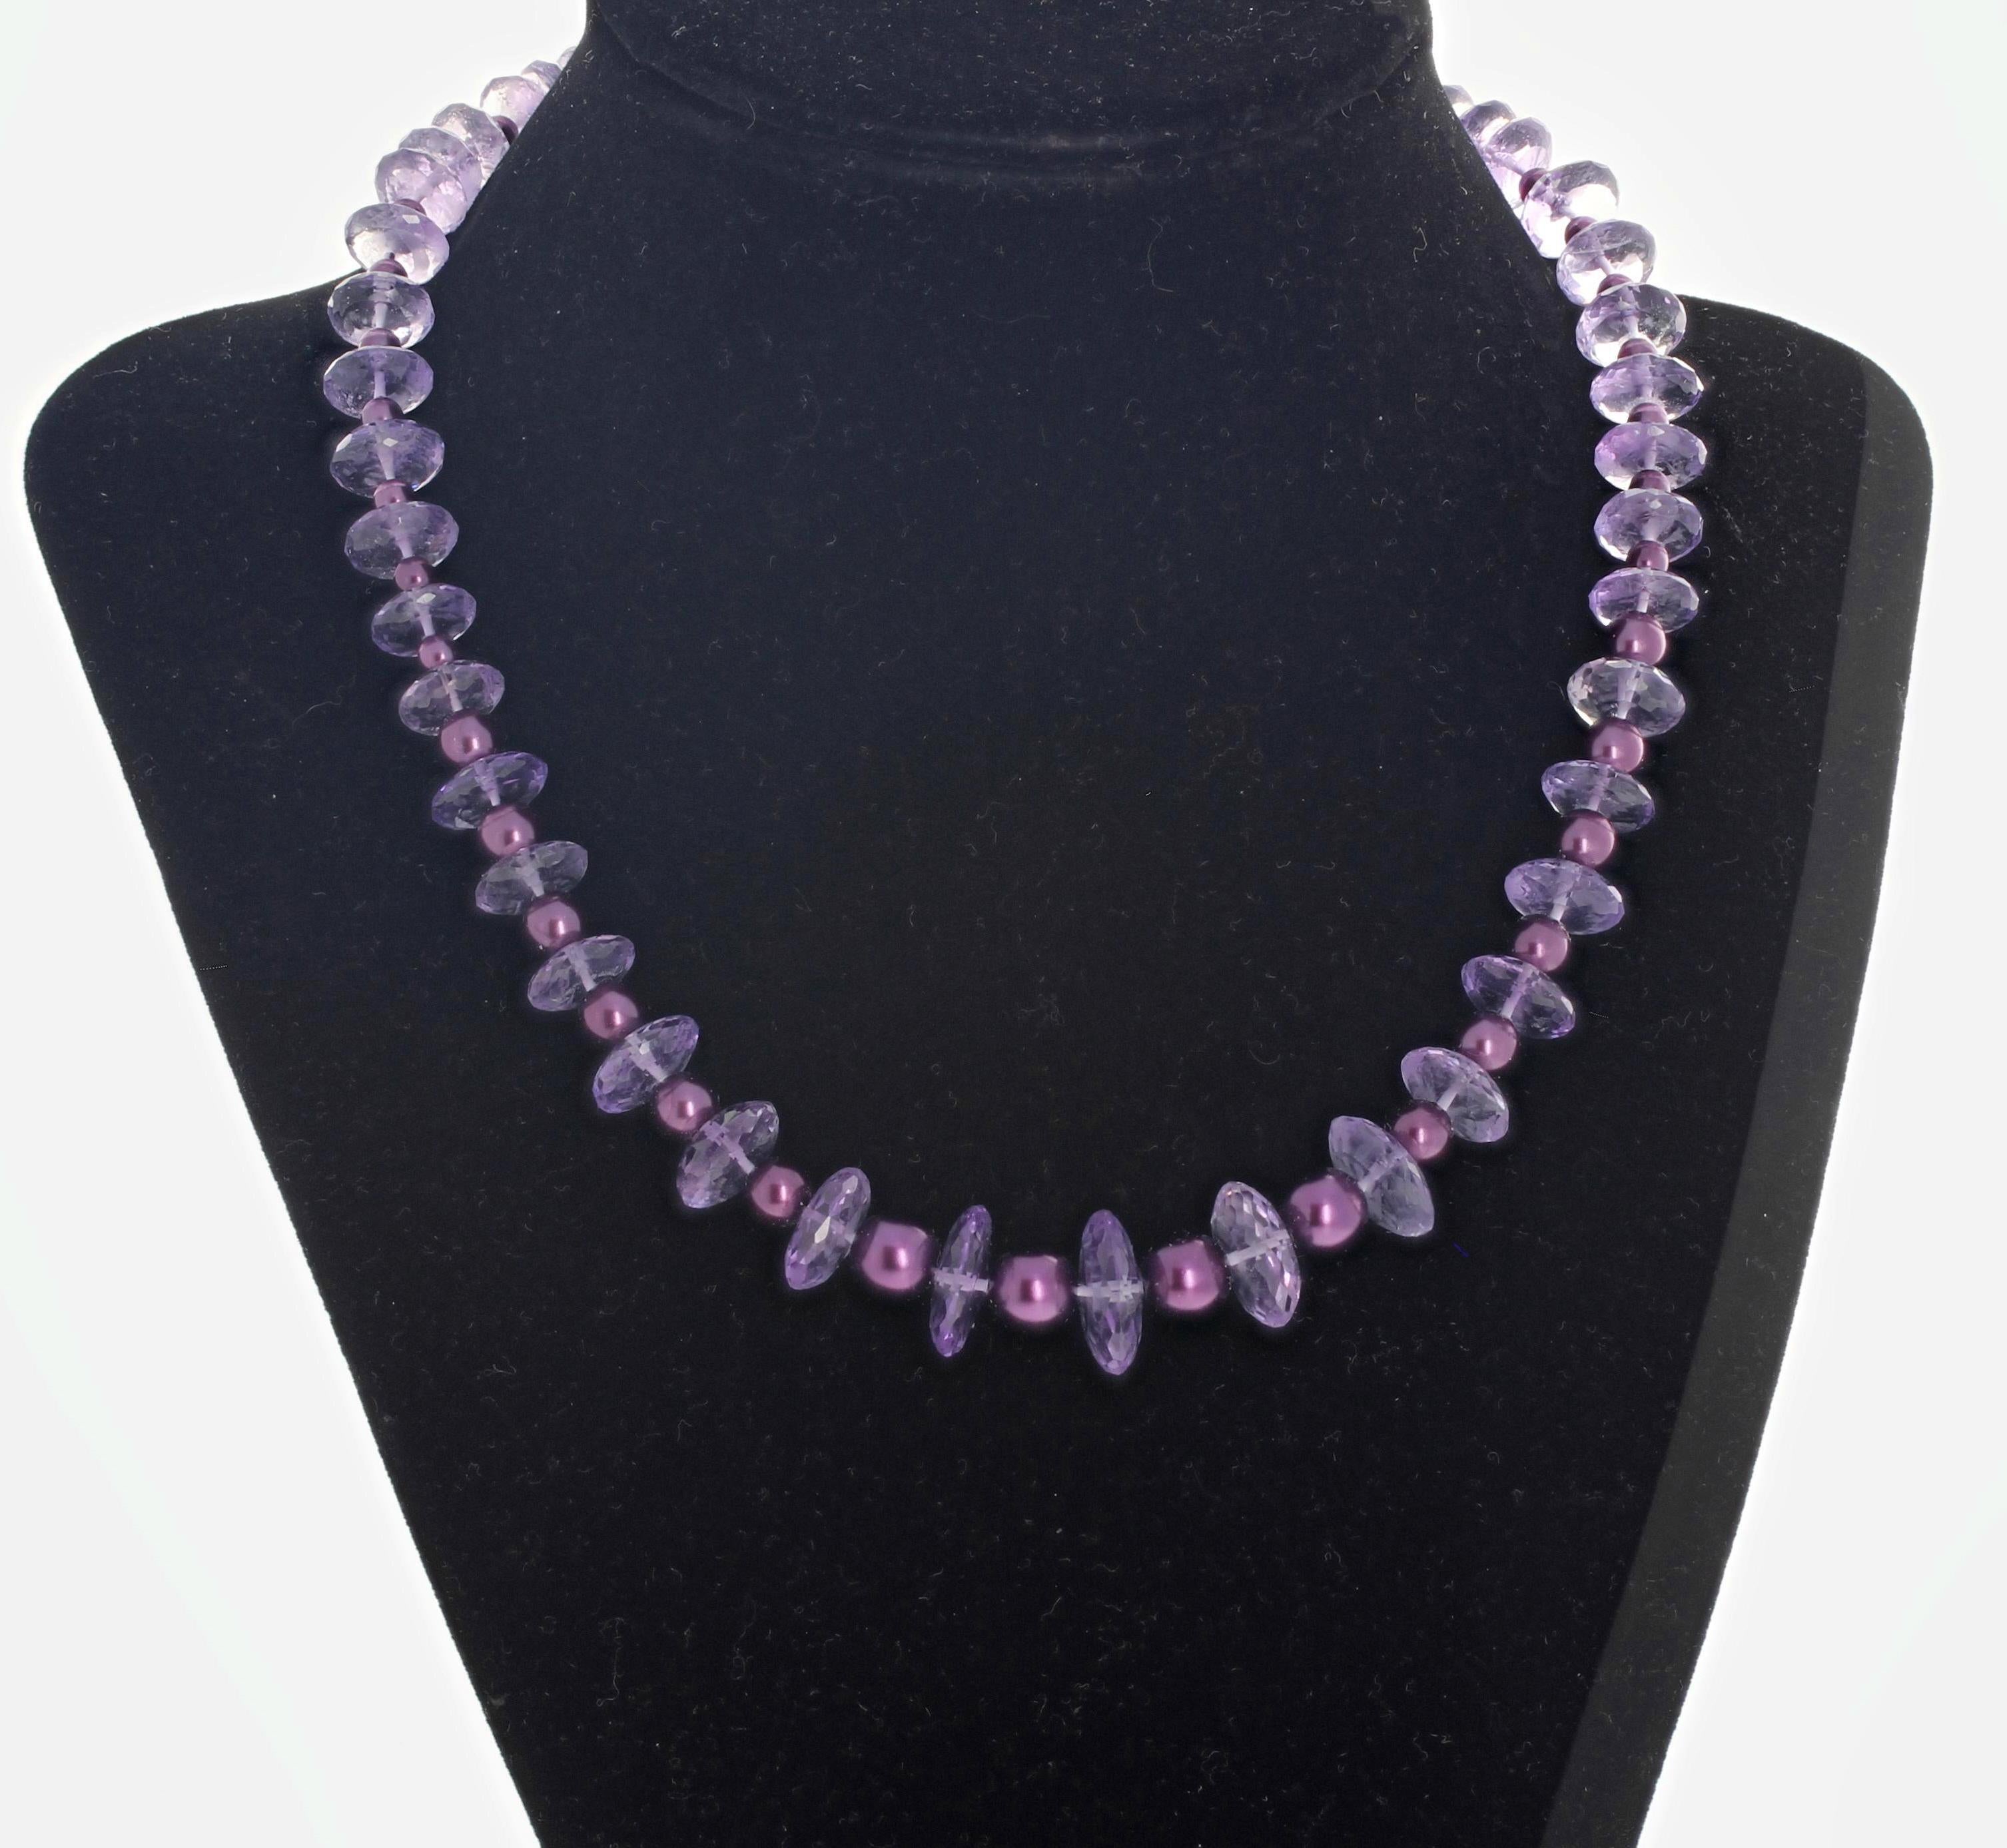 Gem cut highly polished brilliant rondels of Rose of France Amethysts enhanced with glowing glass pearls compose this lovely 16 inch long handmade dramatic necklace.  The clasp is vermeil (gold plated sterling silver) encrusted with teeny tiny